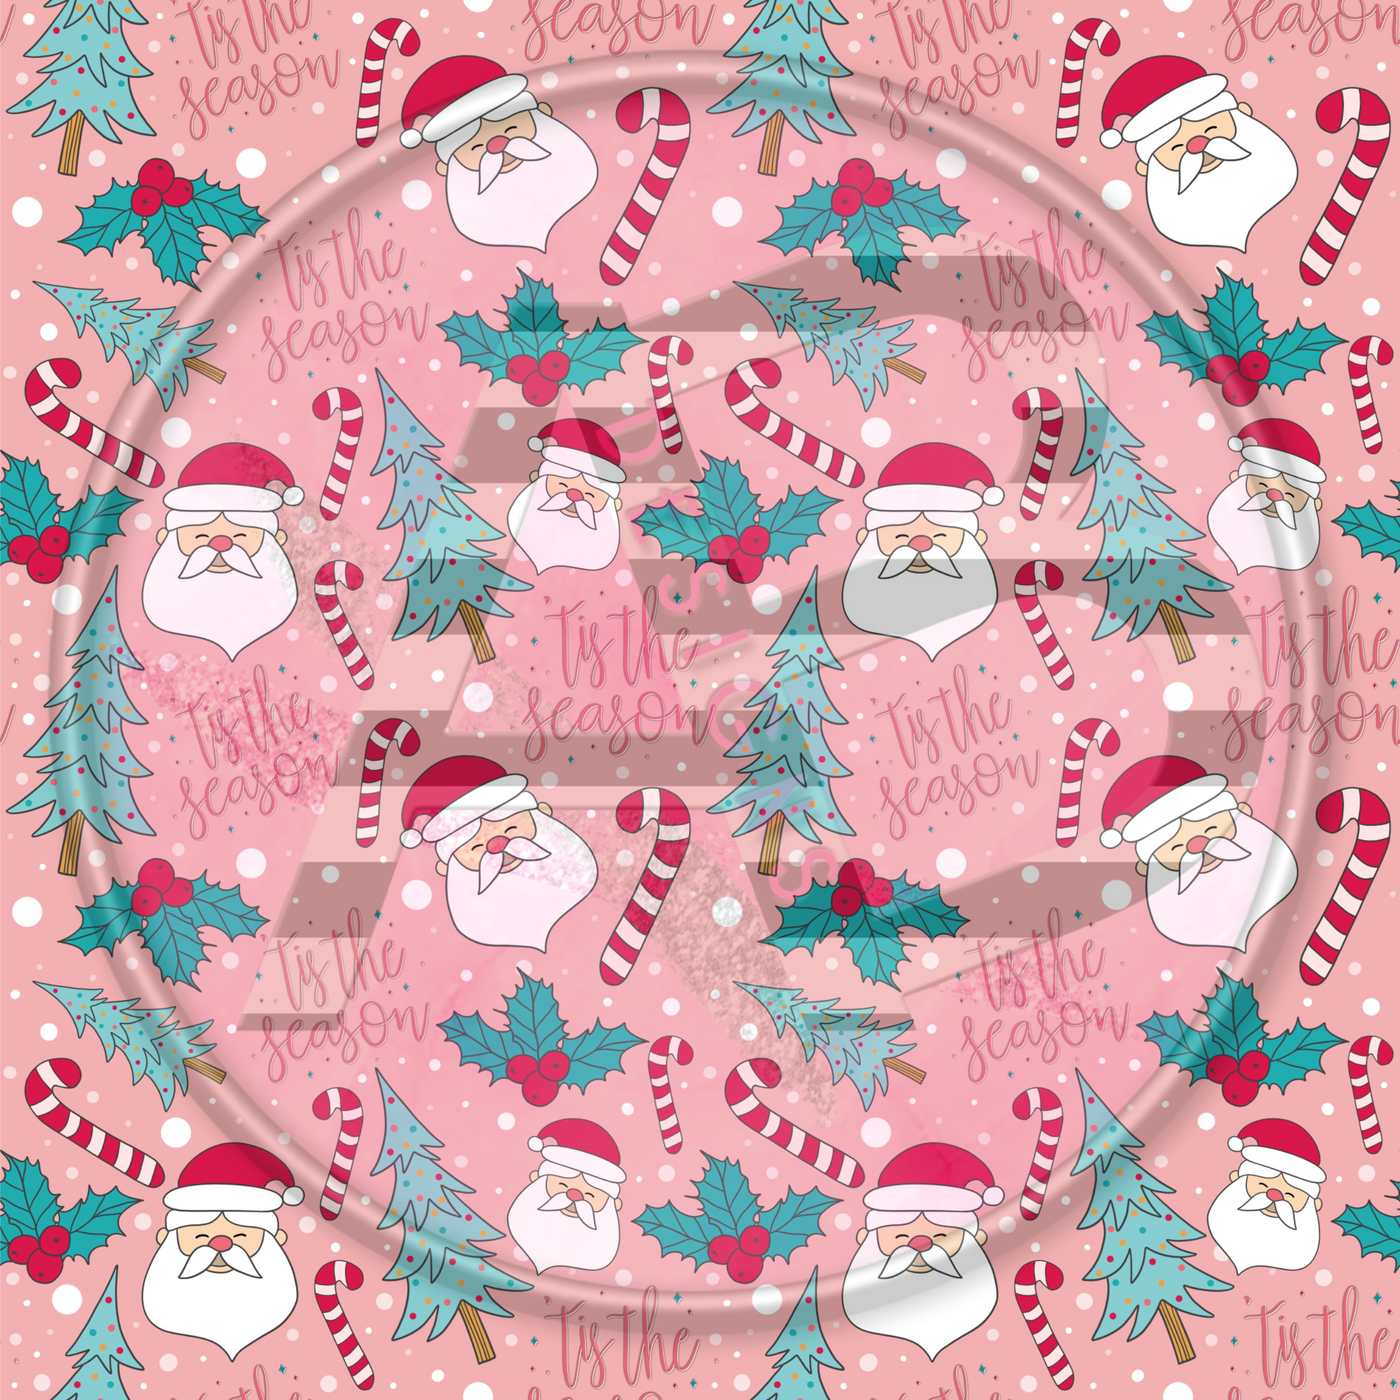 Adhesive Patterned Vinyl - Christmas 5020 Smaller